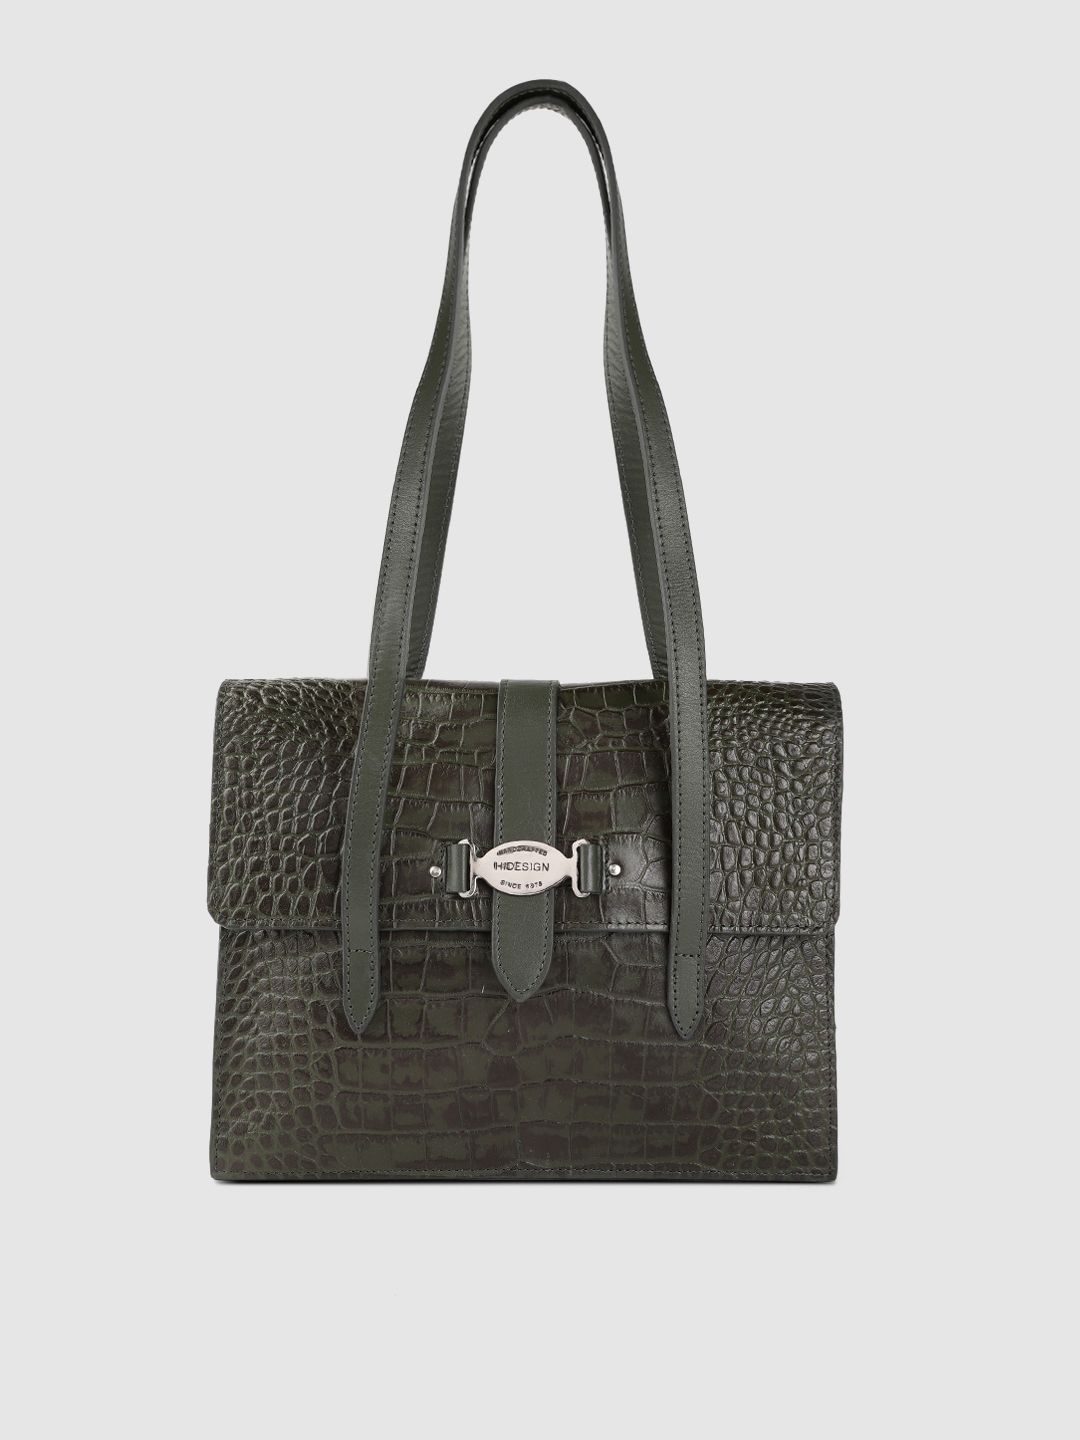 Hidesign Green Croc Textured Structured Leather Shoulder Bag Price in India